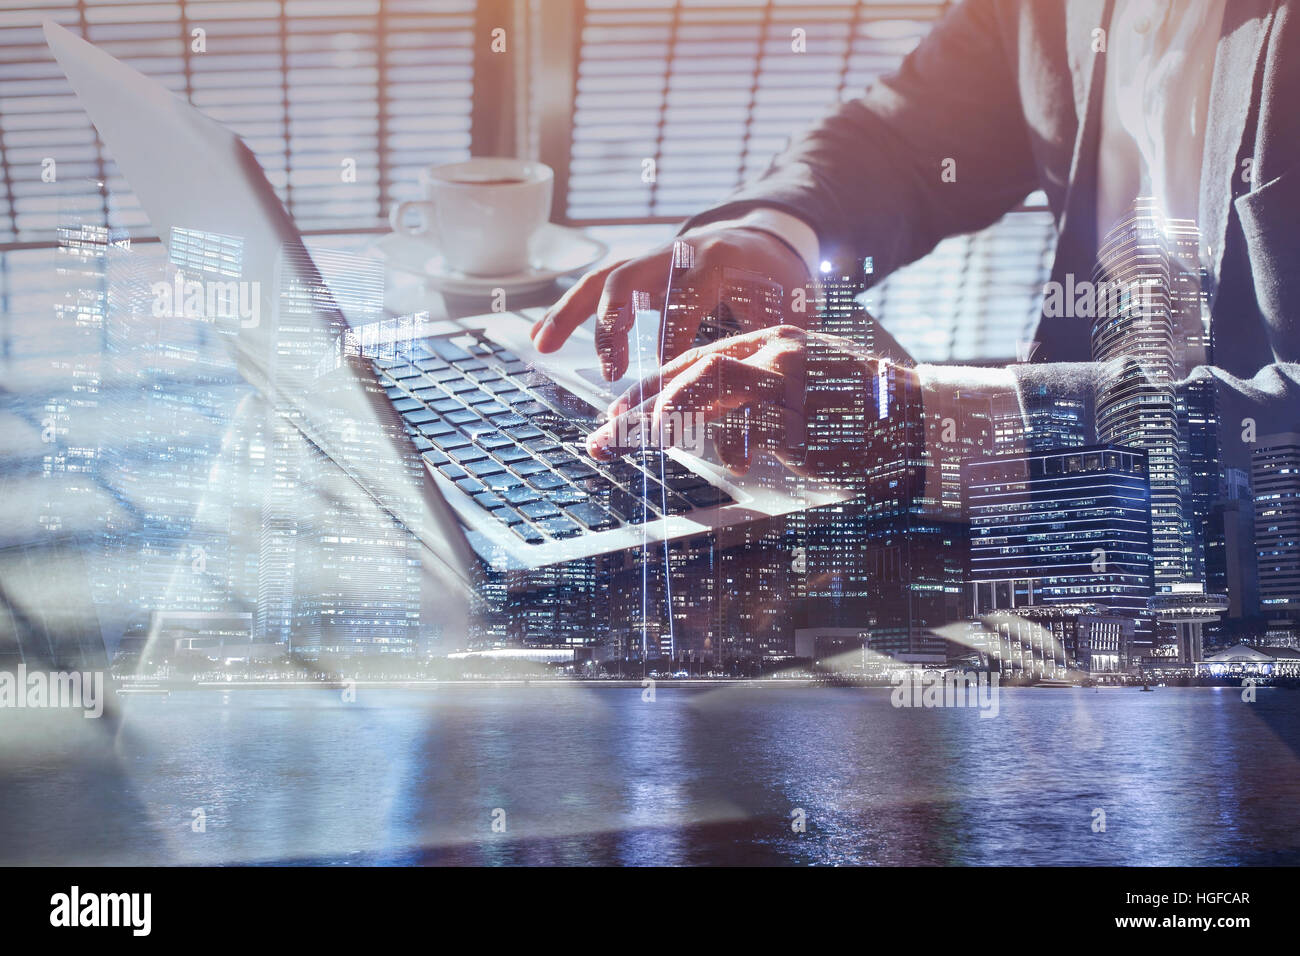 double exposure of business man working online on laptop, close up of hands, checking email or internet banking concept Stock Photo